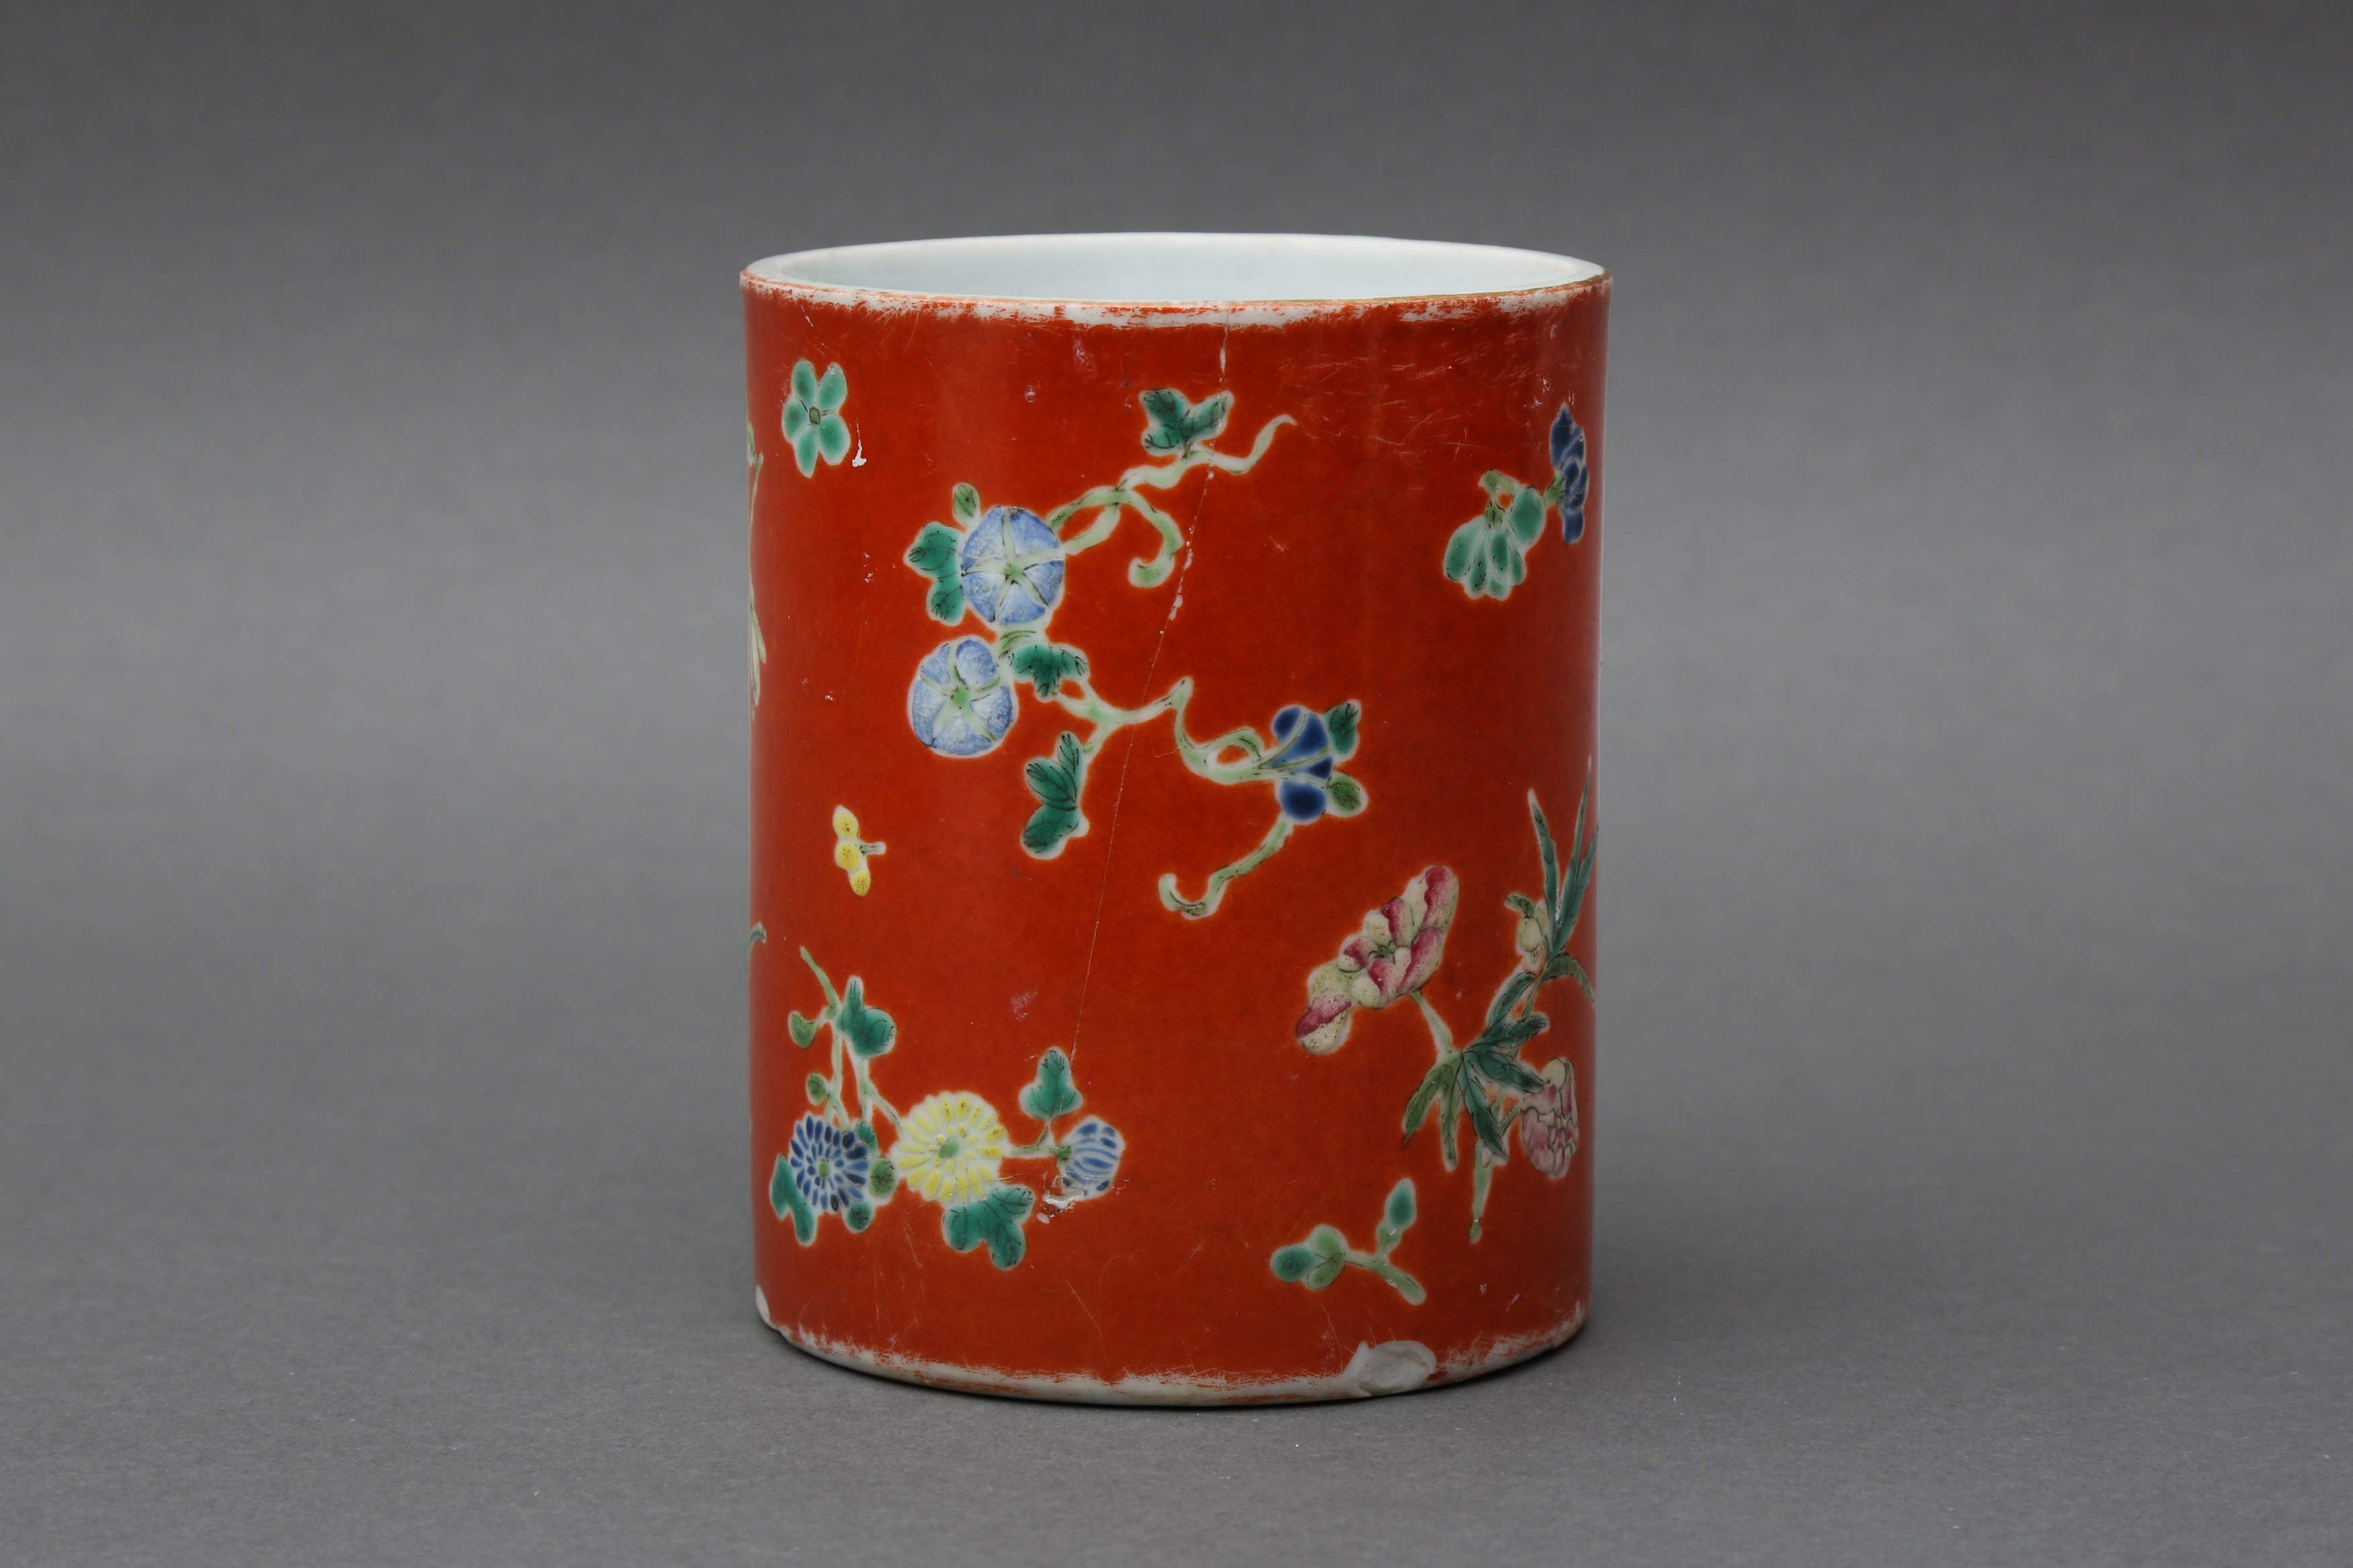 A CHINESE FAMILLE-ROSE CORAL-GROUND 'BLOSSOMS' BRUSH POT, BITONG 清十八至十九世紀 粉彩珊瑚紅地花卉紋筆筒 - Image 2 of 11